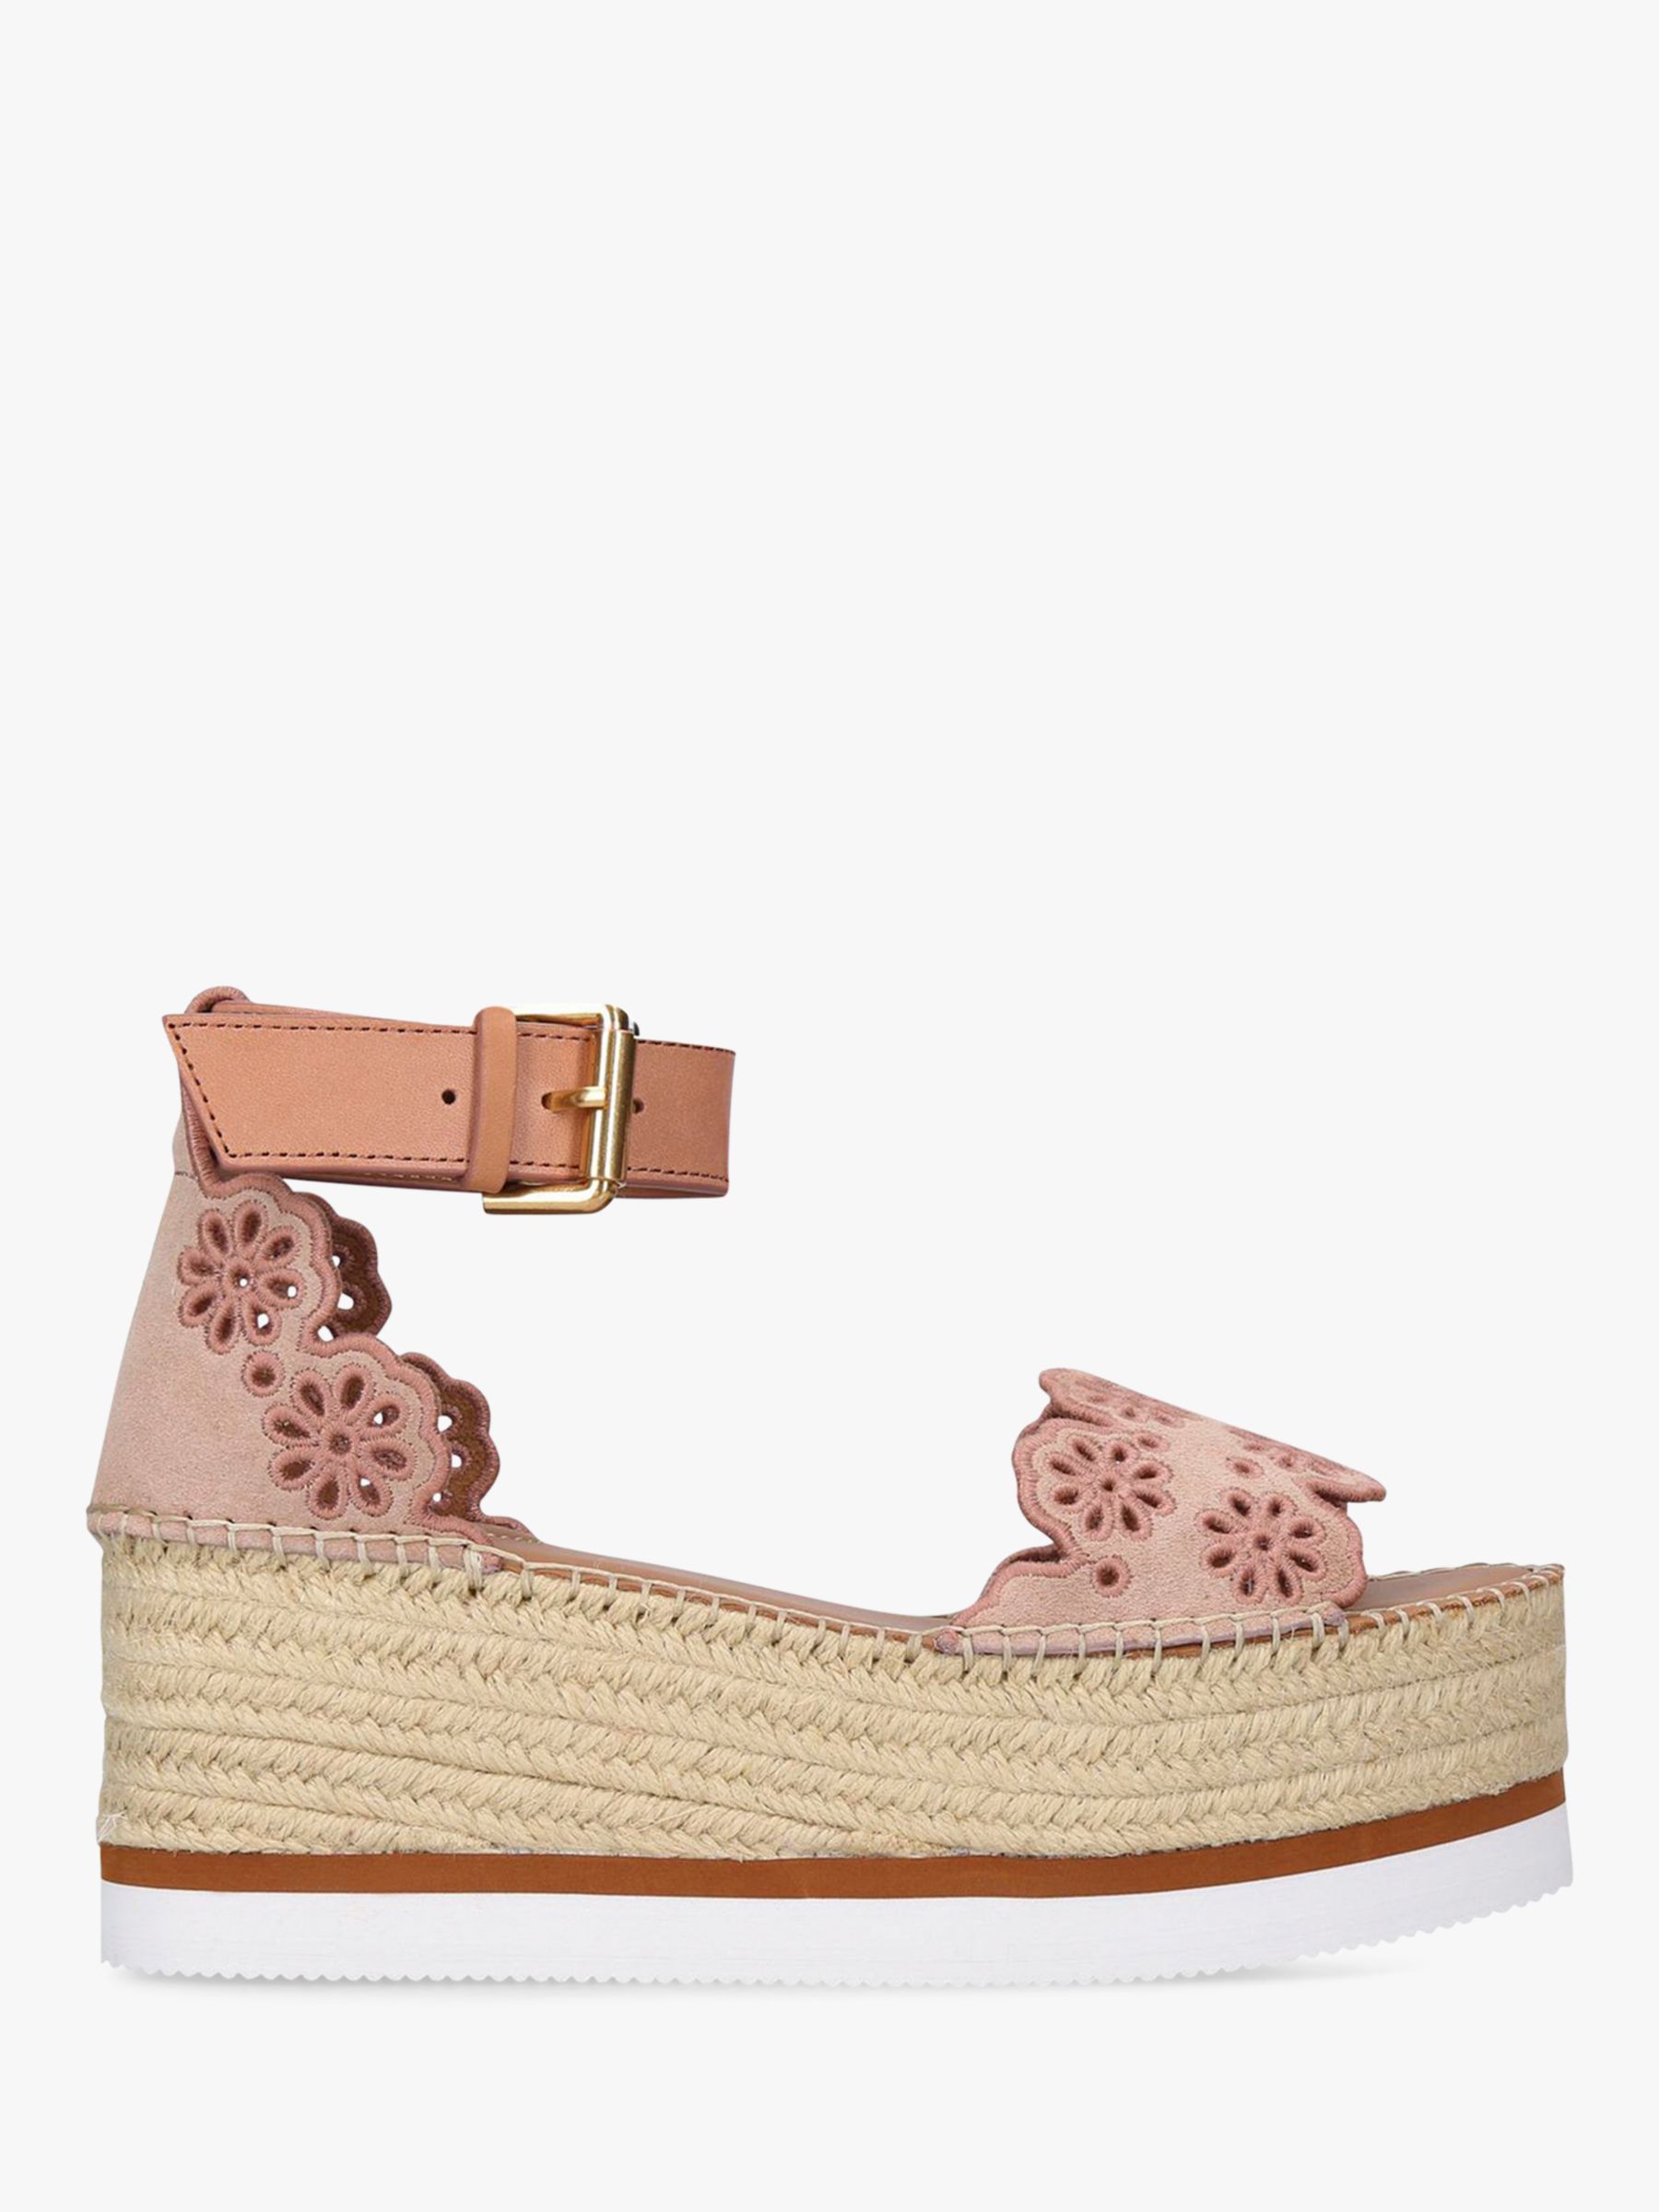 See By Chloé Floral Suede Espadrille Wedge Sandal, Pink